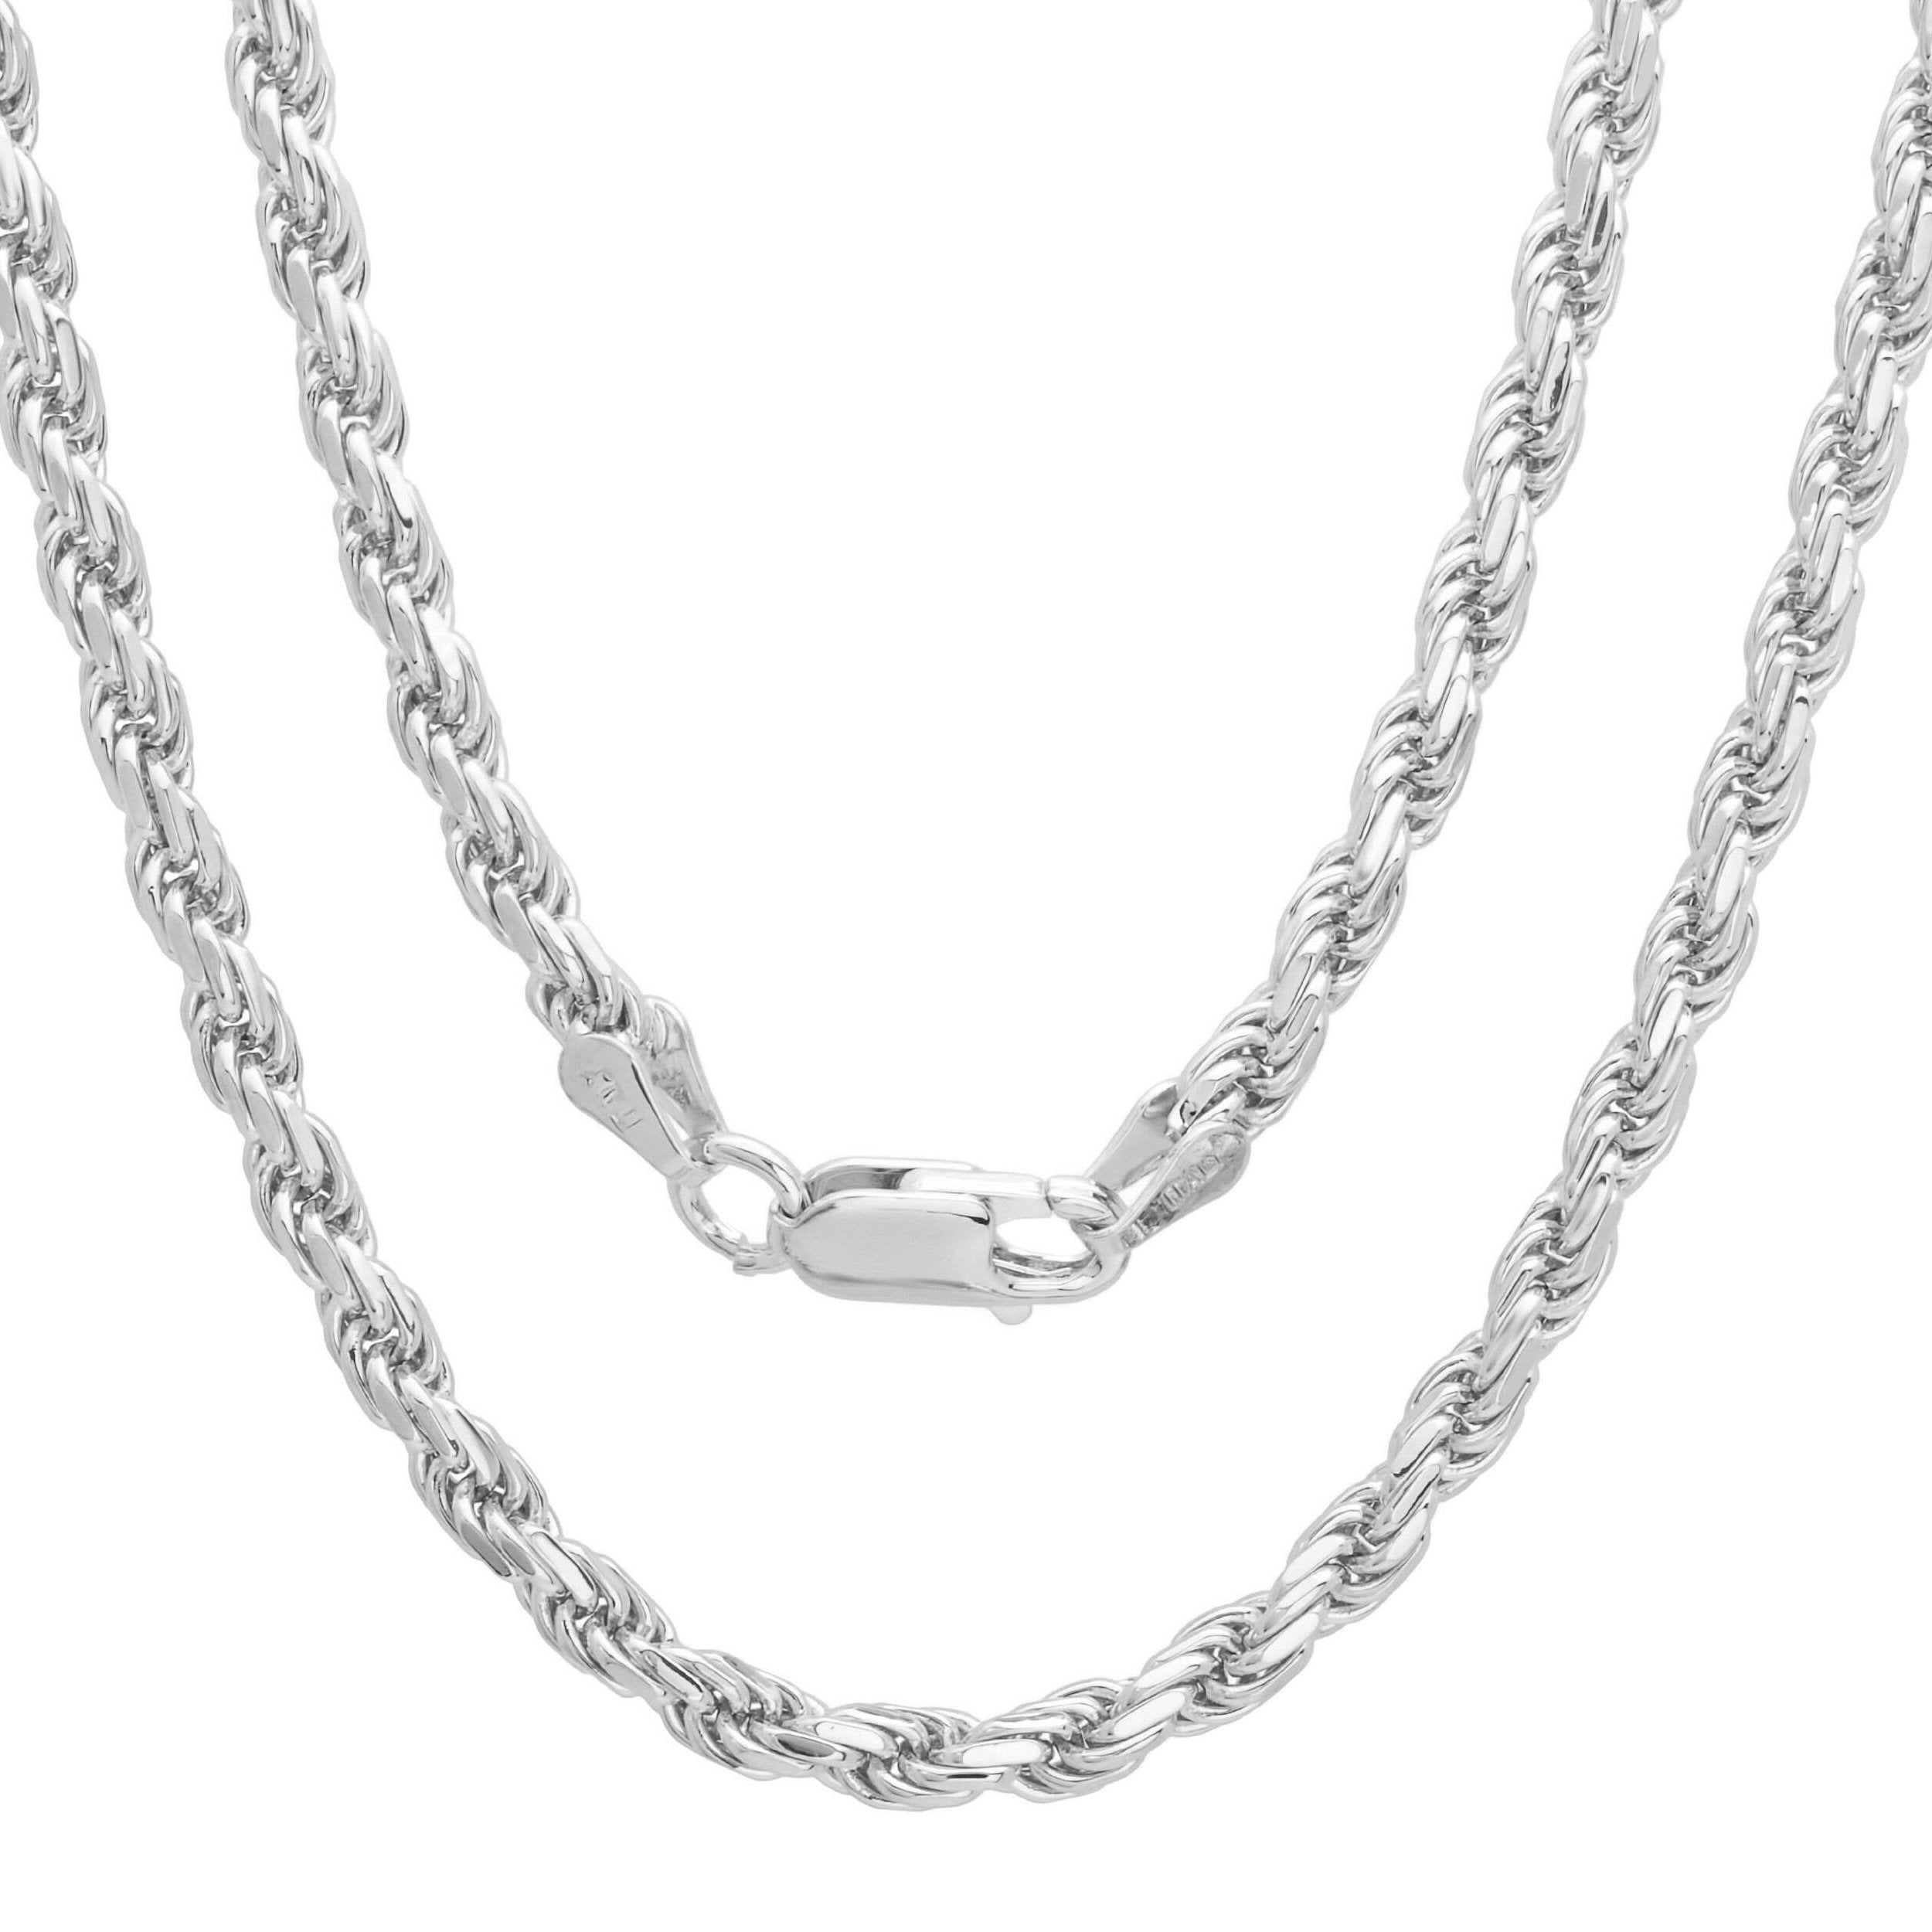 1.6MM 035 Rhodium Plated Rope Chain .925 Sterling Silver Length "7-24" Inches